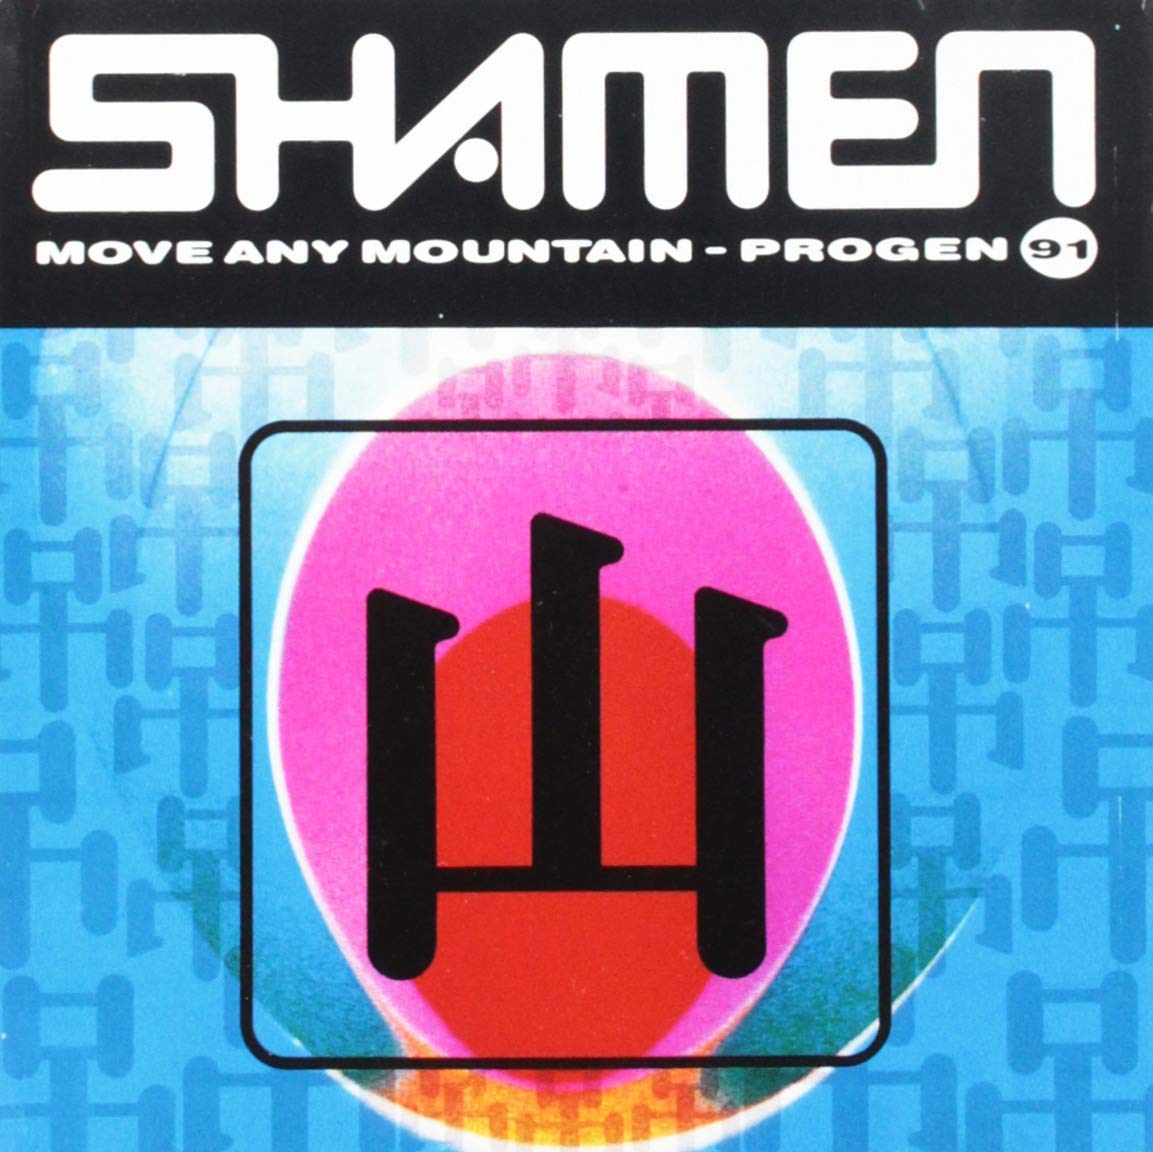 NEWS The Shamen, Moving Any Mountain since 1991! (32 years!)